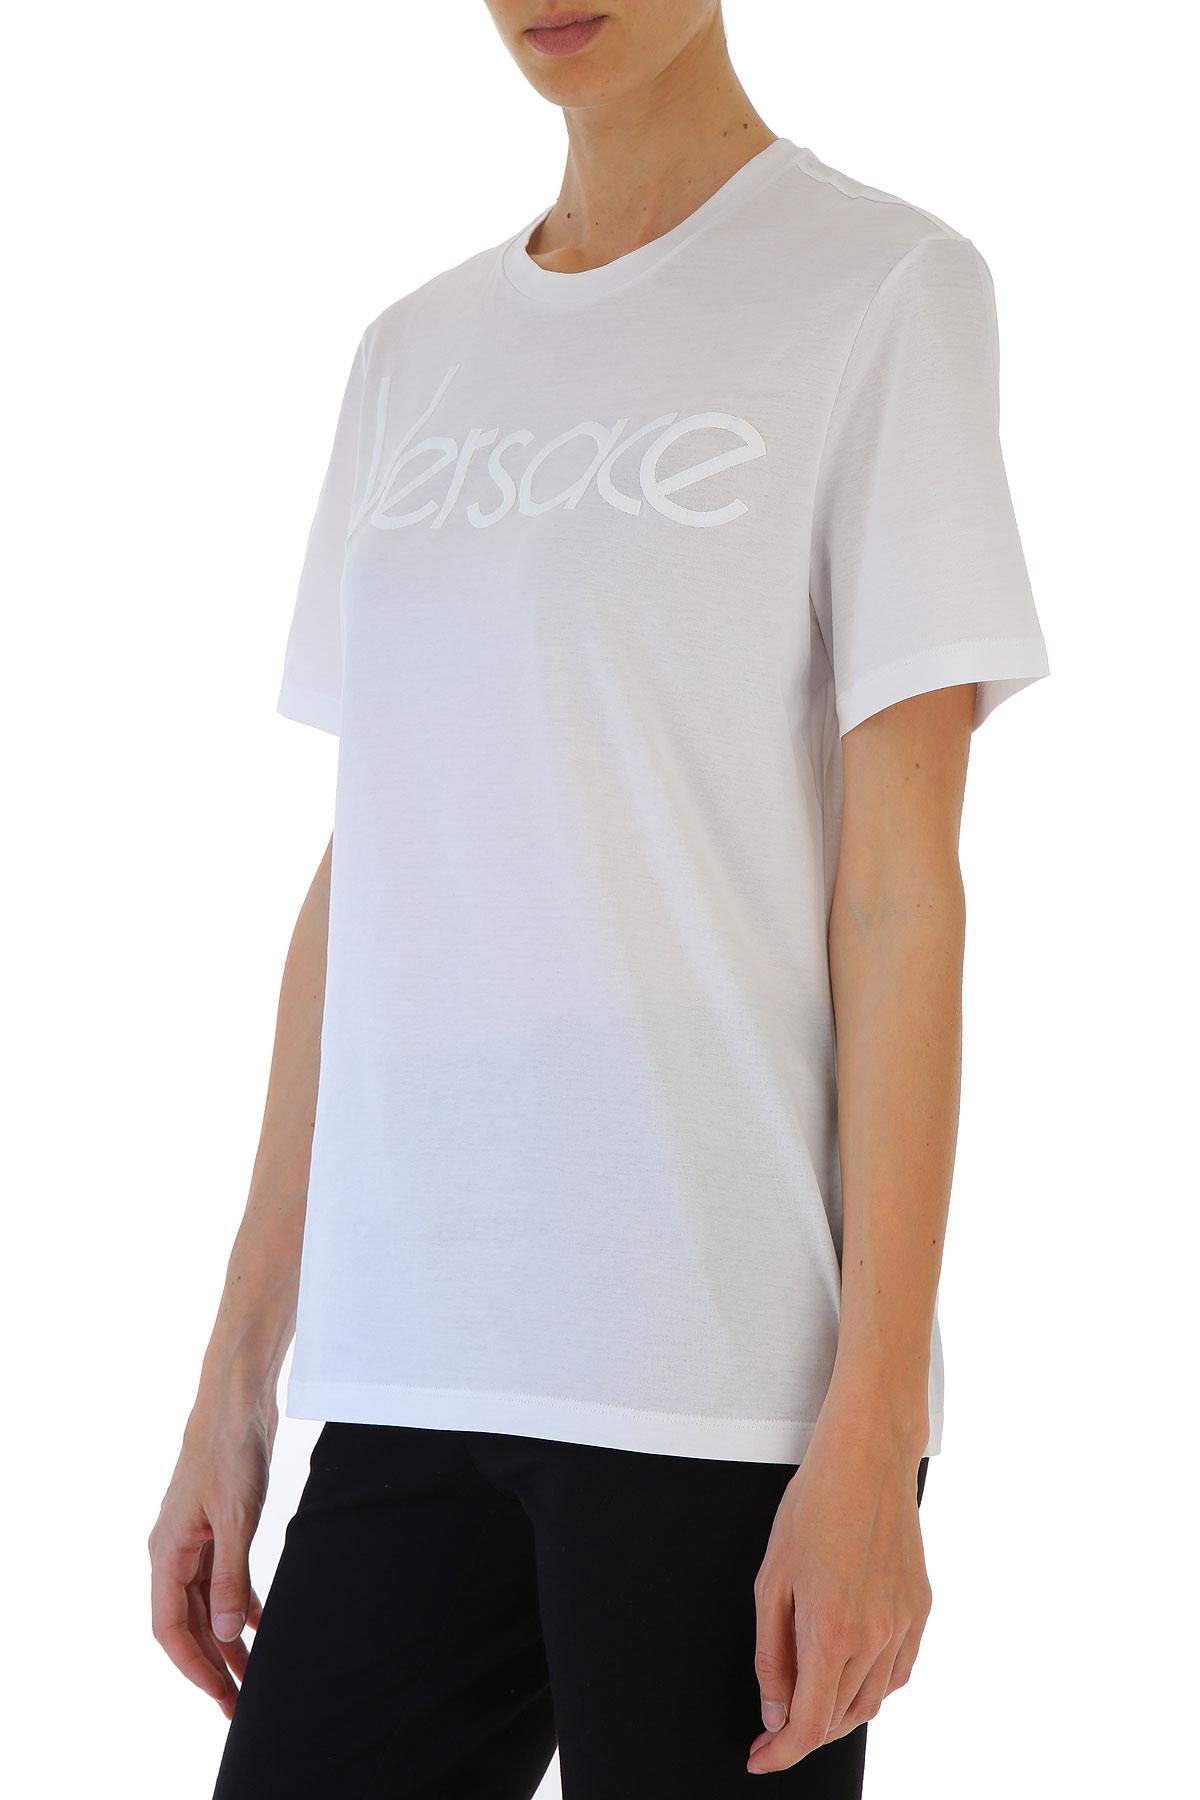 Versace Cotton Clothing For Women in White - Lyst